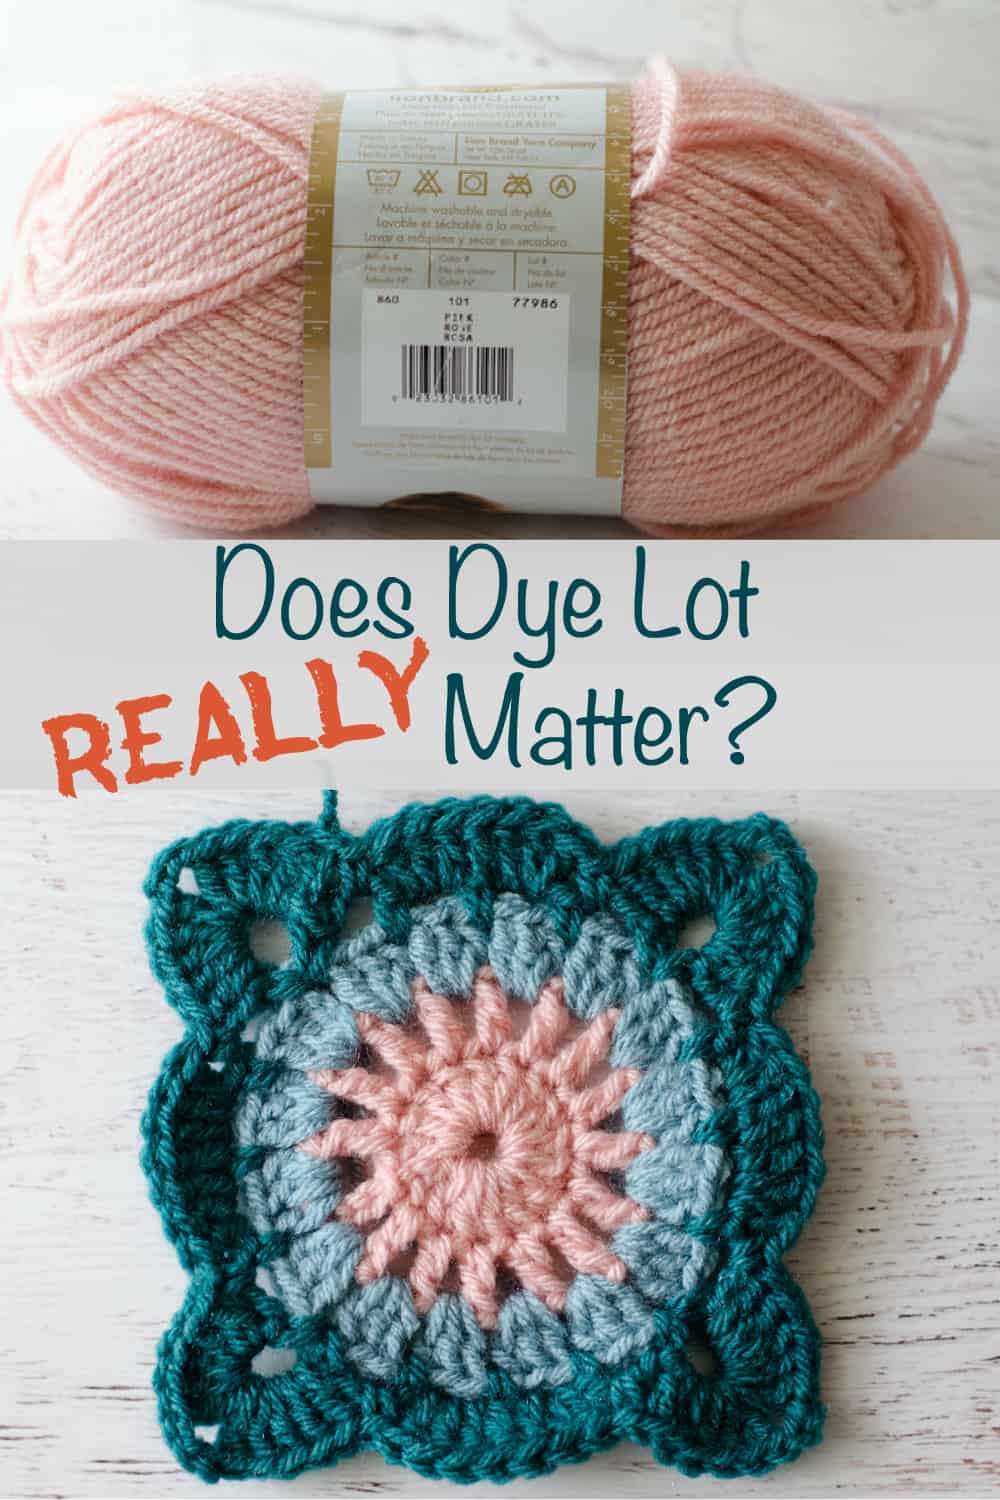 Graphic of crochet motif and pink yarn asking if dye lot matters